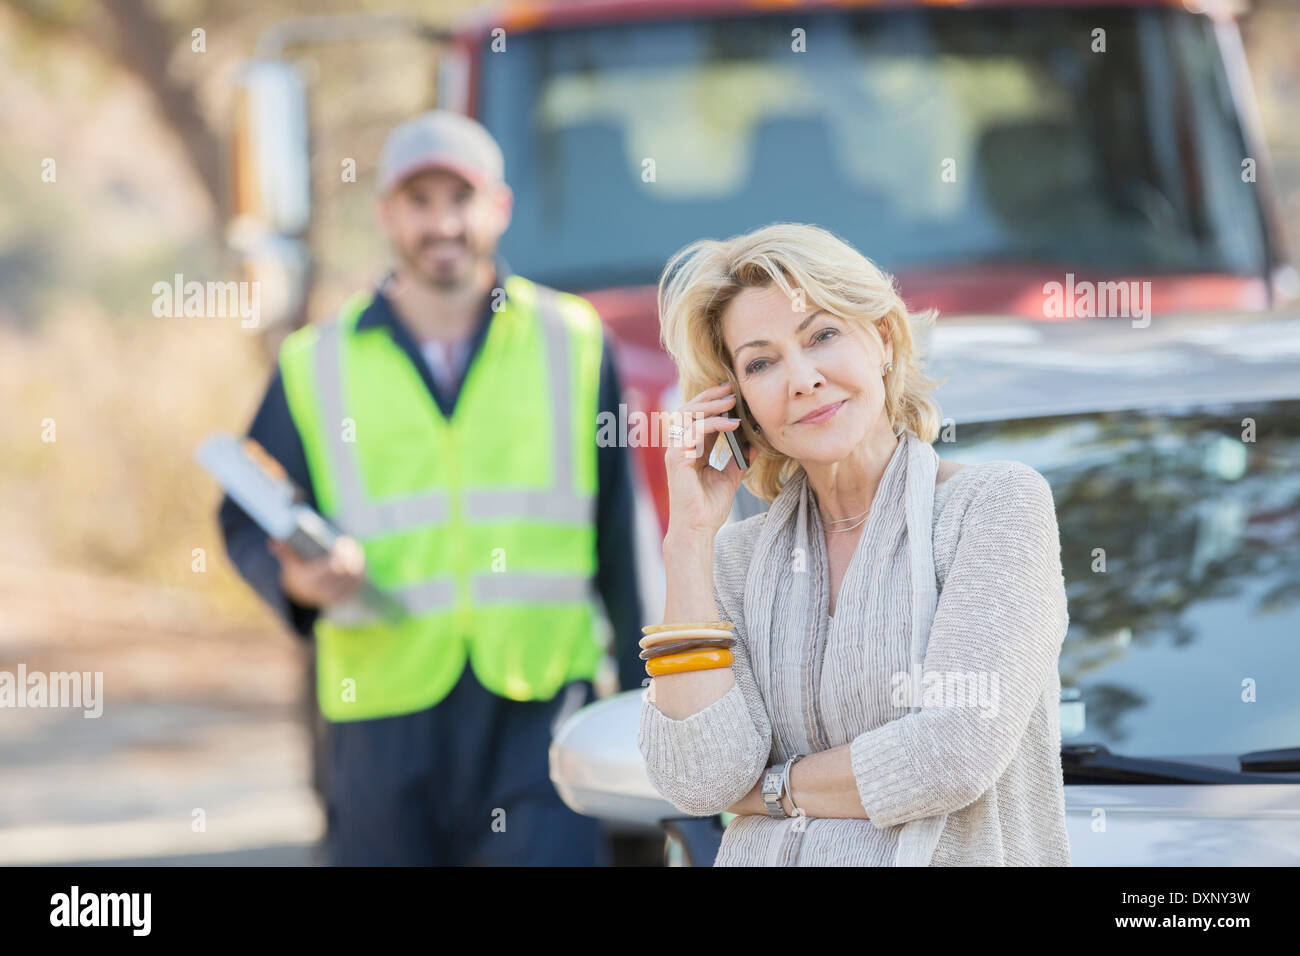 Roadside mechanic behind woman on cell phone Stock Photo